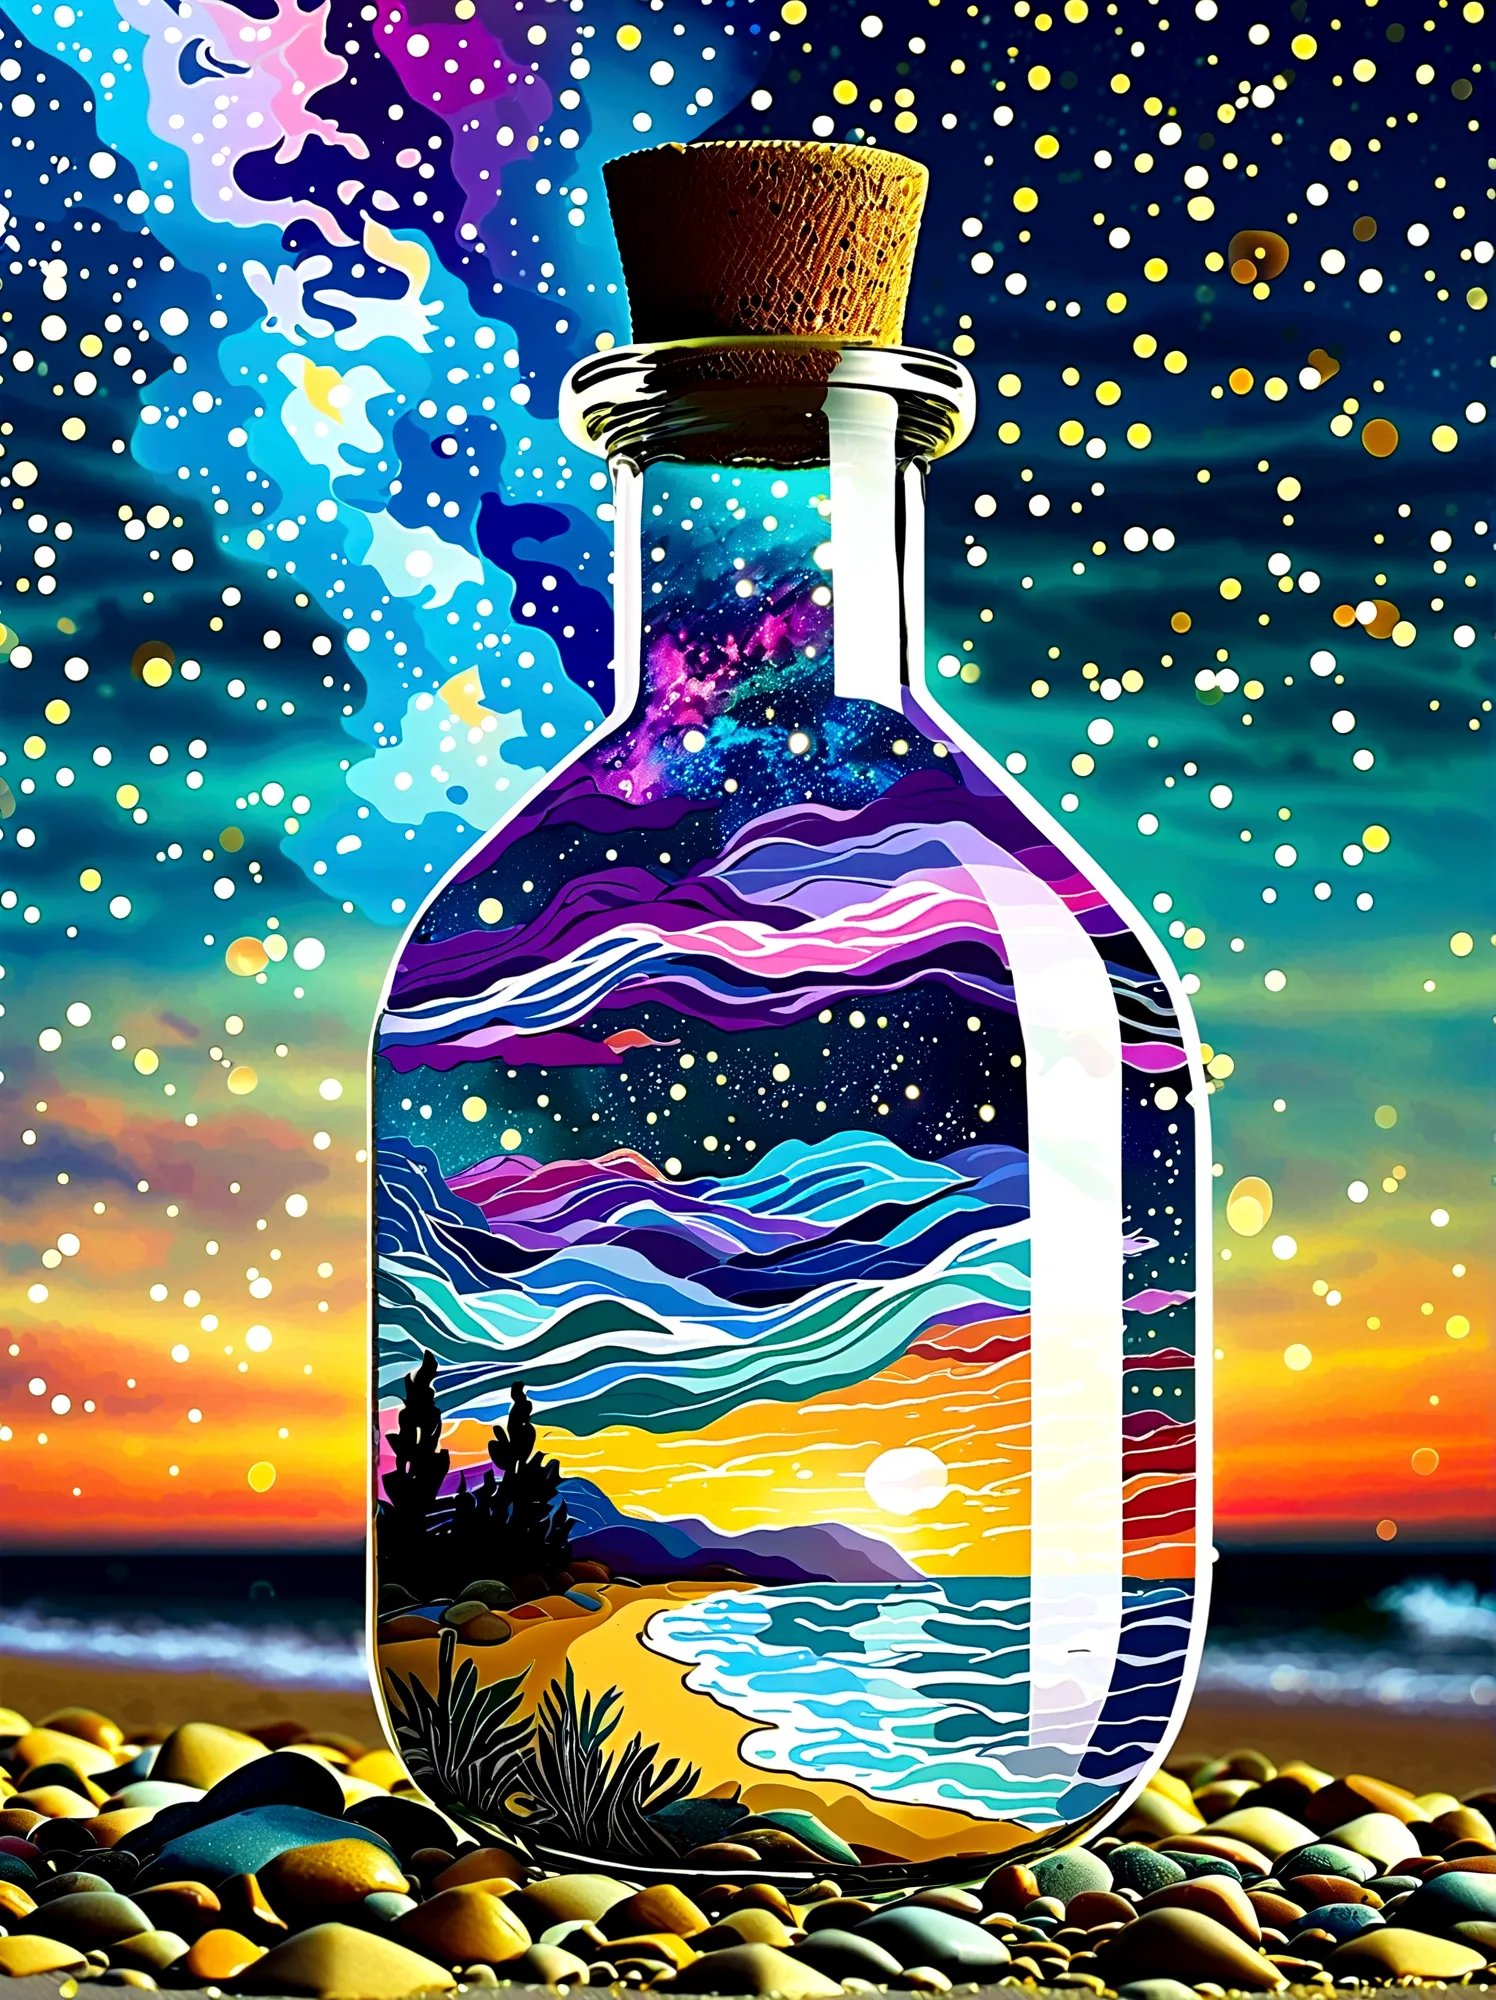 Starry sky Van Gogh painting trapped inside a hourglass bottle. Color and starry skies spilling out of the bottle and pooling on...